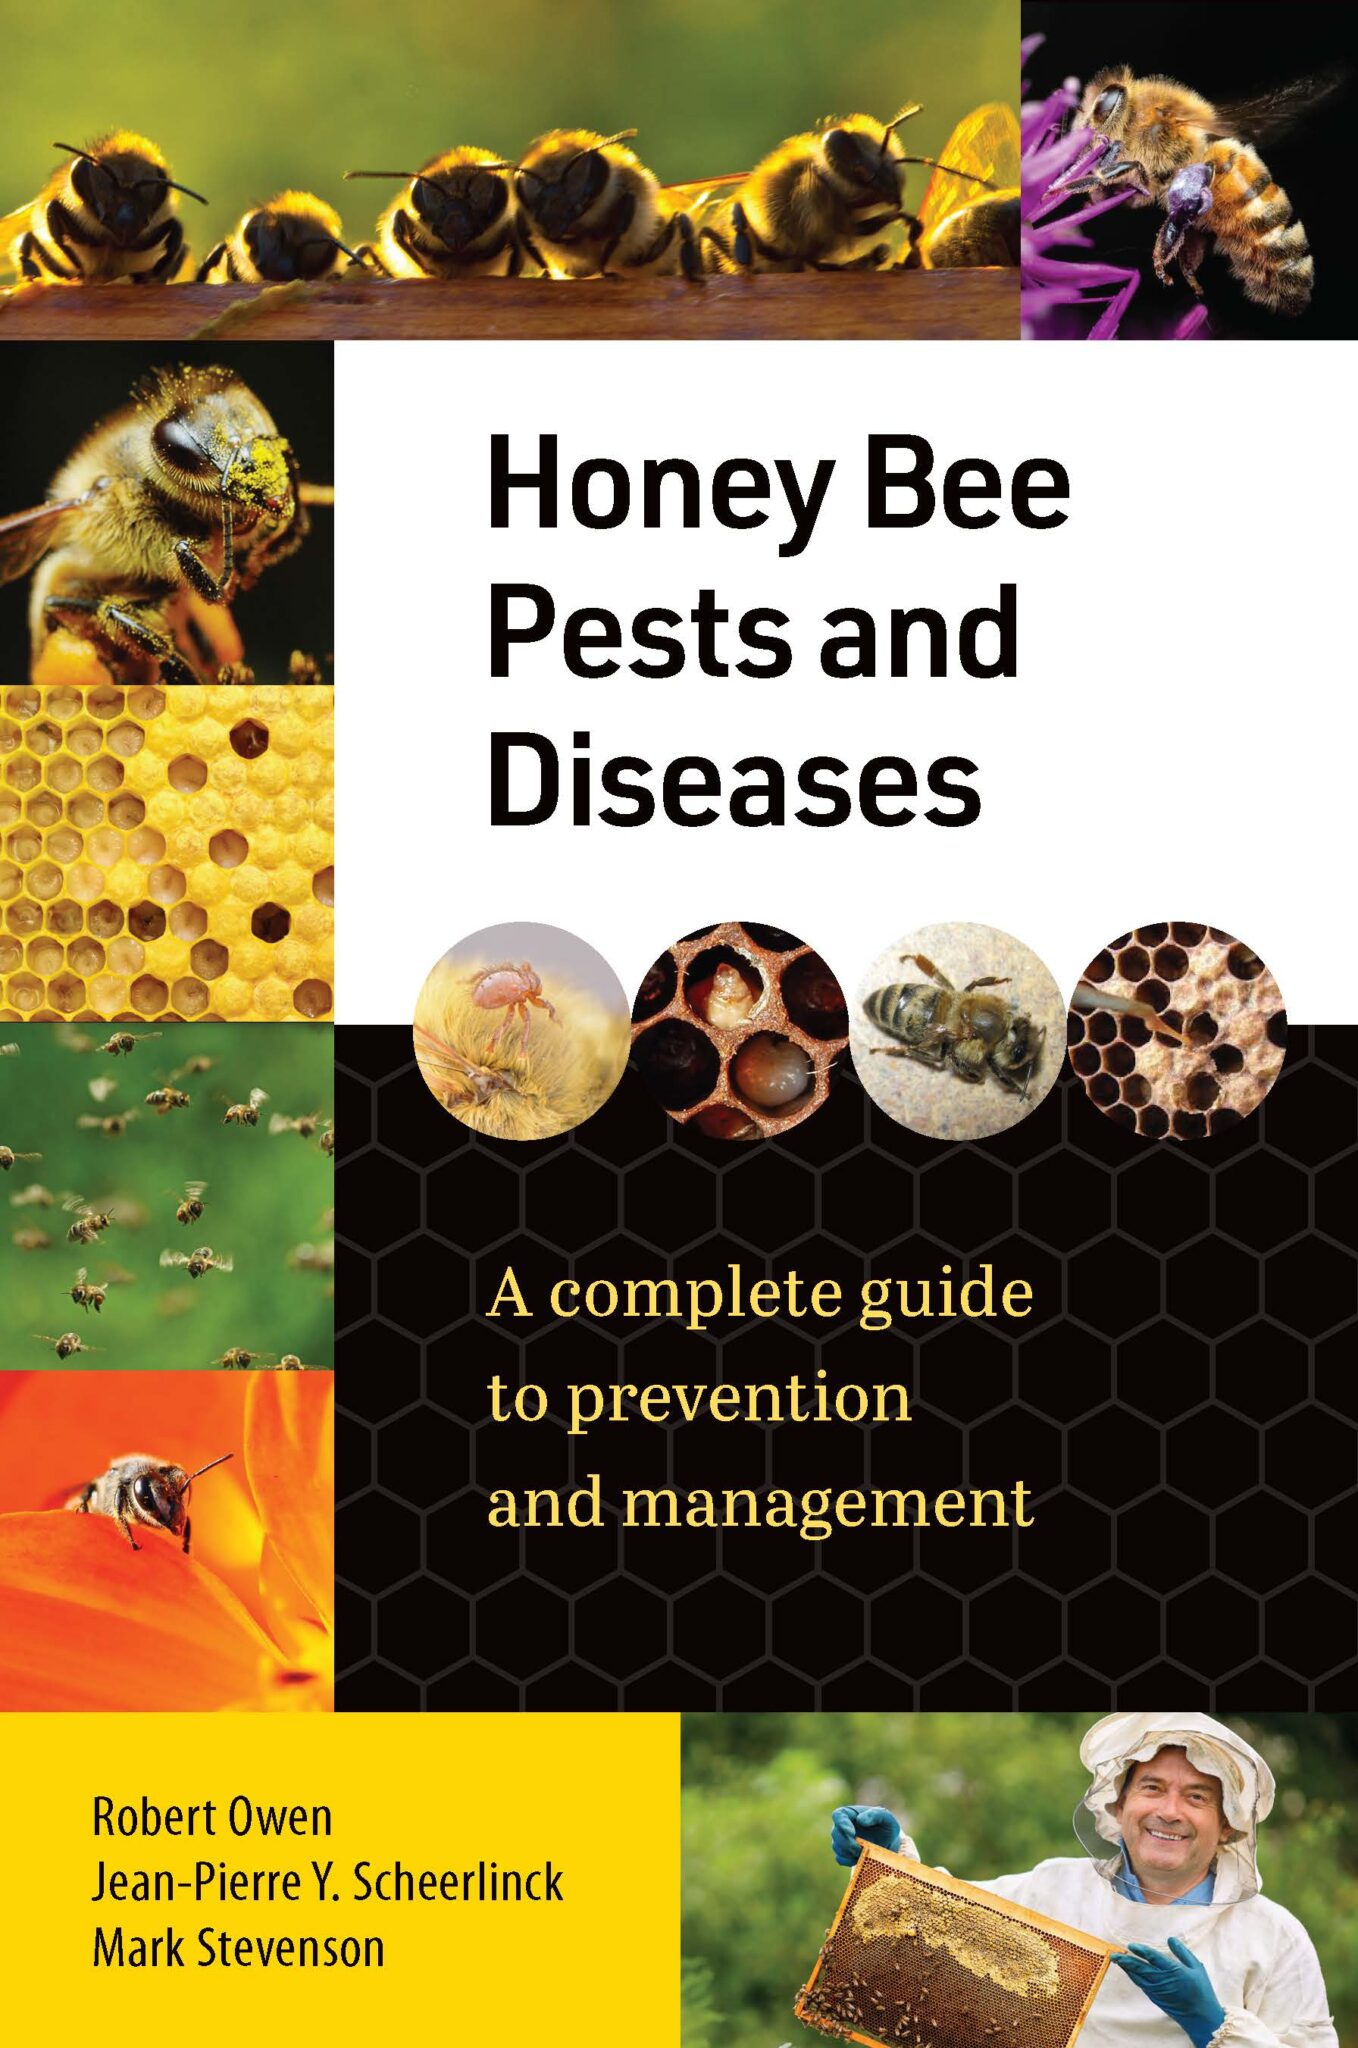 Honey Bee Pests and Diseases A Complete Guide to Prevention and Management